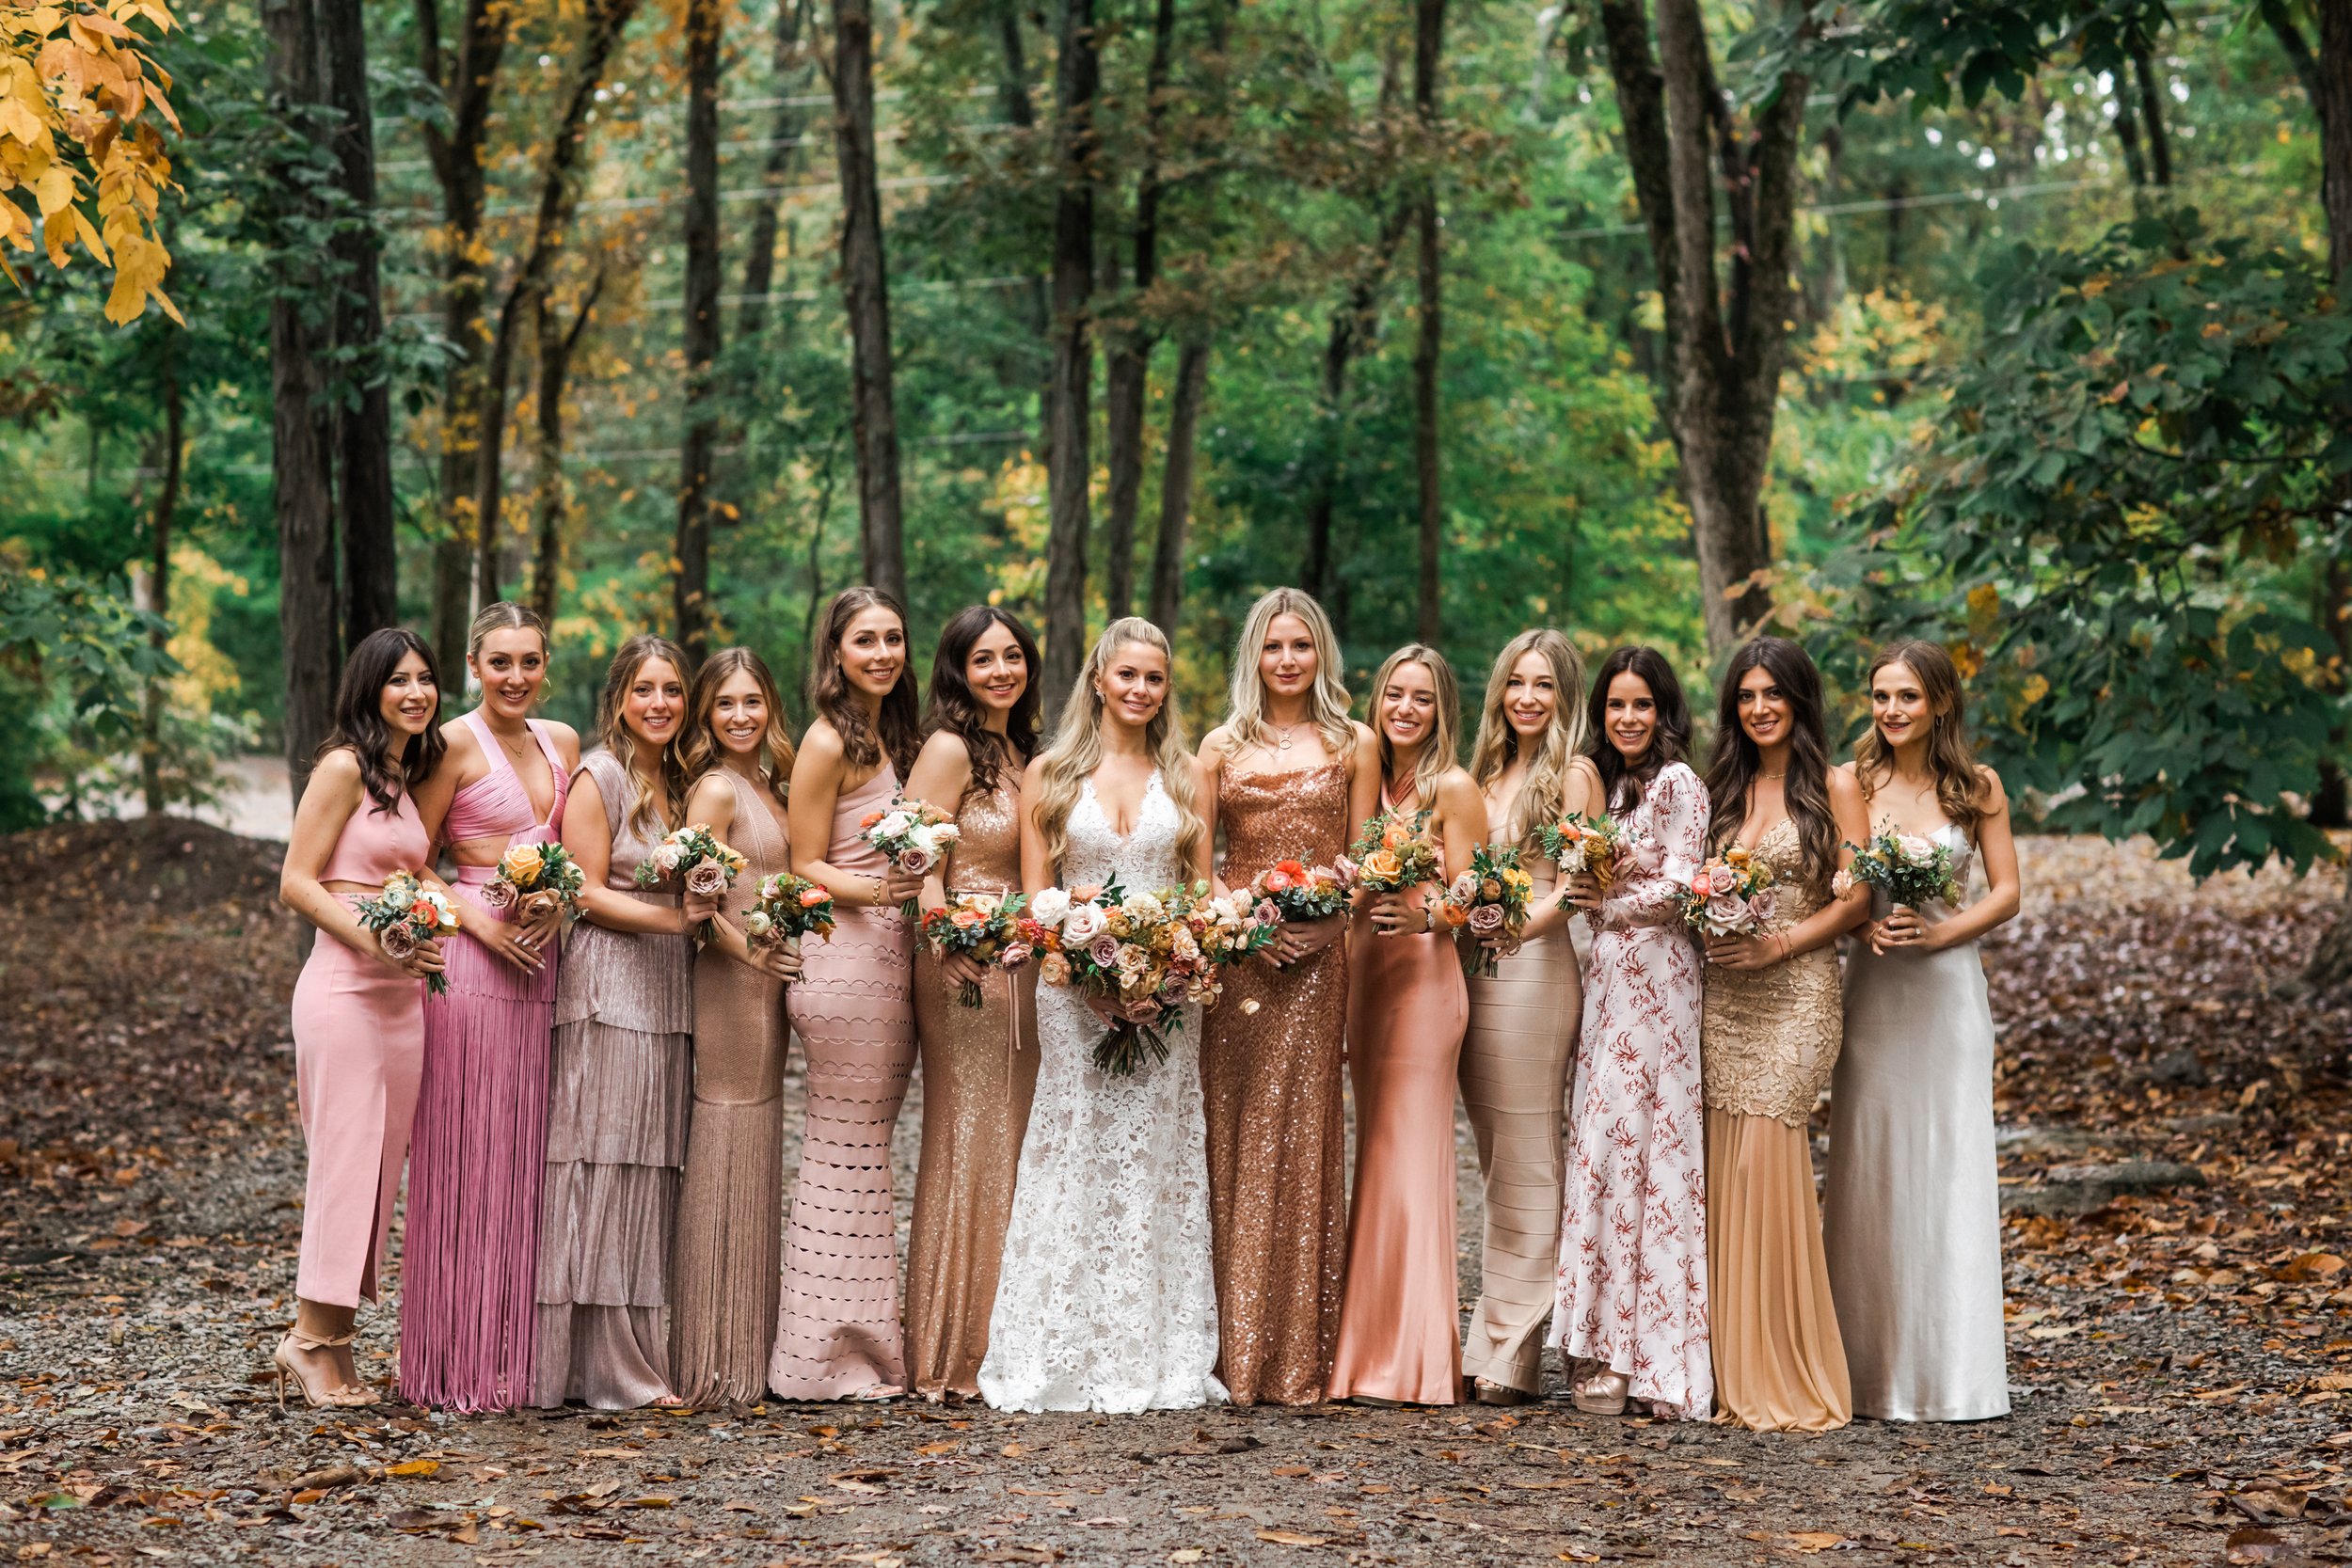 An elegant fall bridal bouquet featuring a sunset color palette of blush, terra cotta, rose gold, yellow, and copper. Florals accents of dahlias, garden roses, ranunculus, and double brownie tulips. Designed by Rosemary and Finch in Nashville, TN.